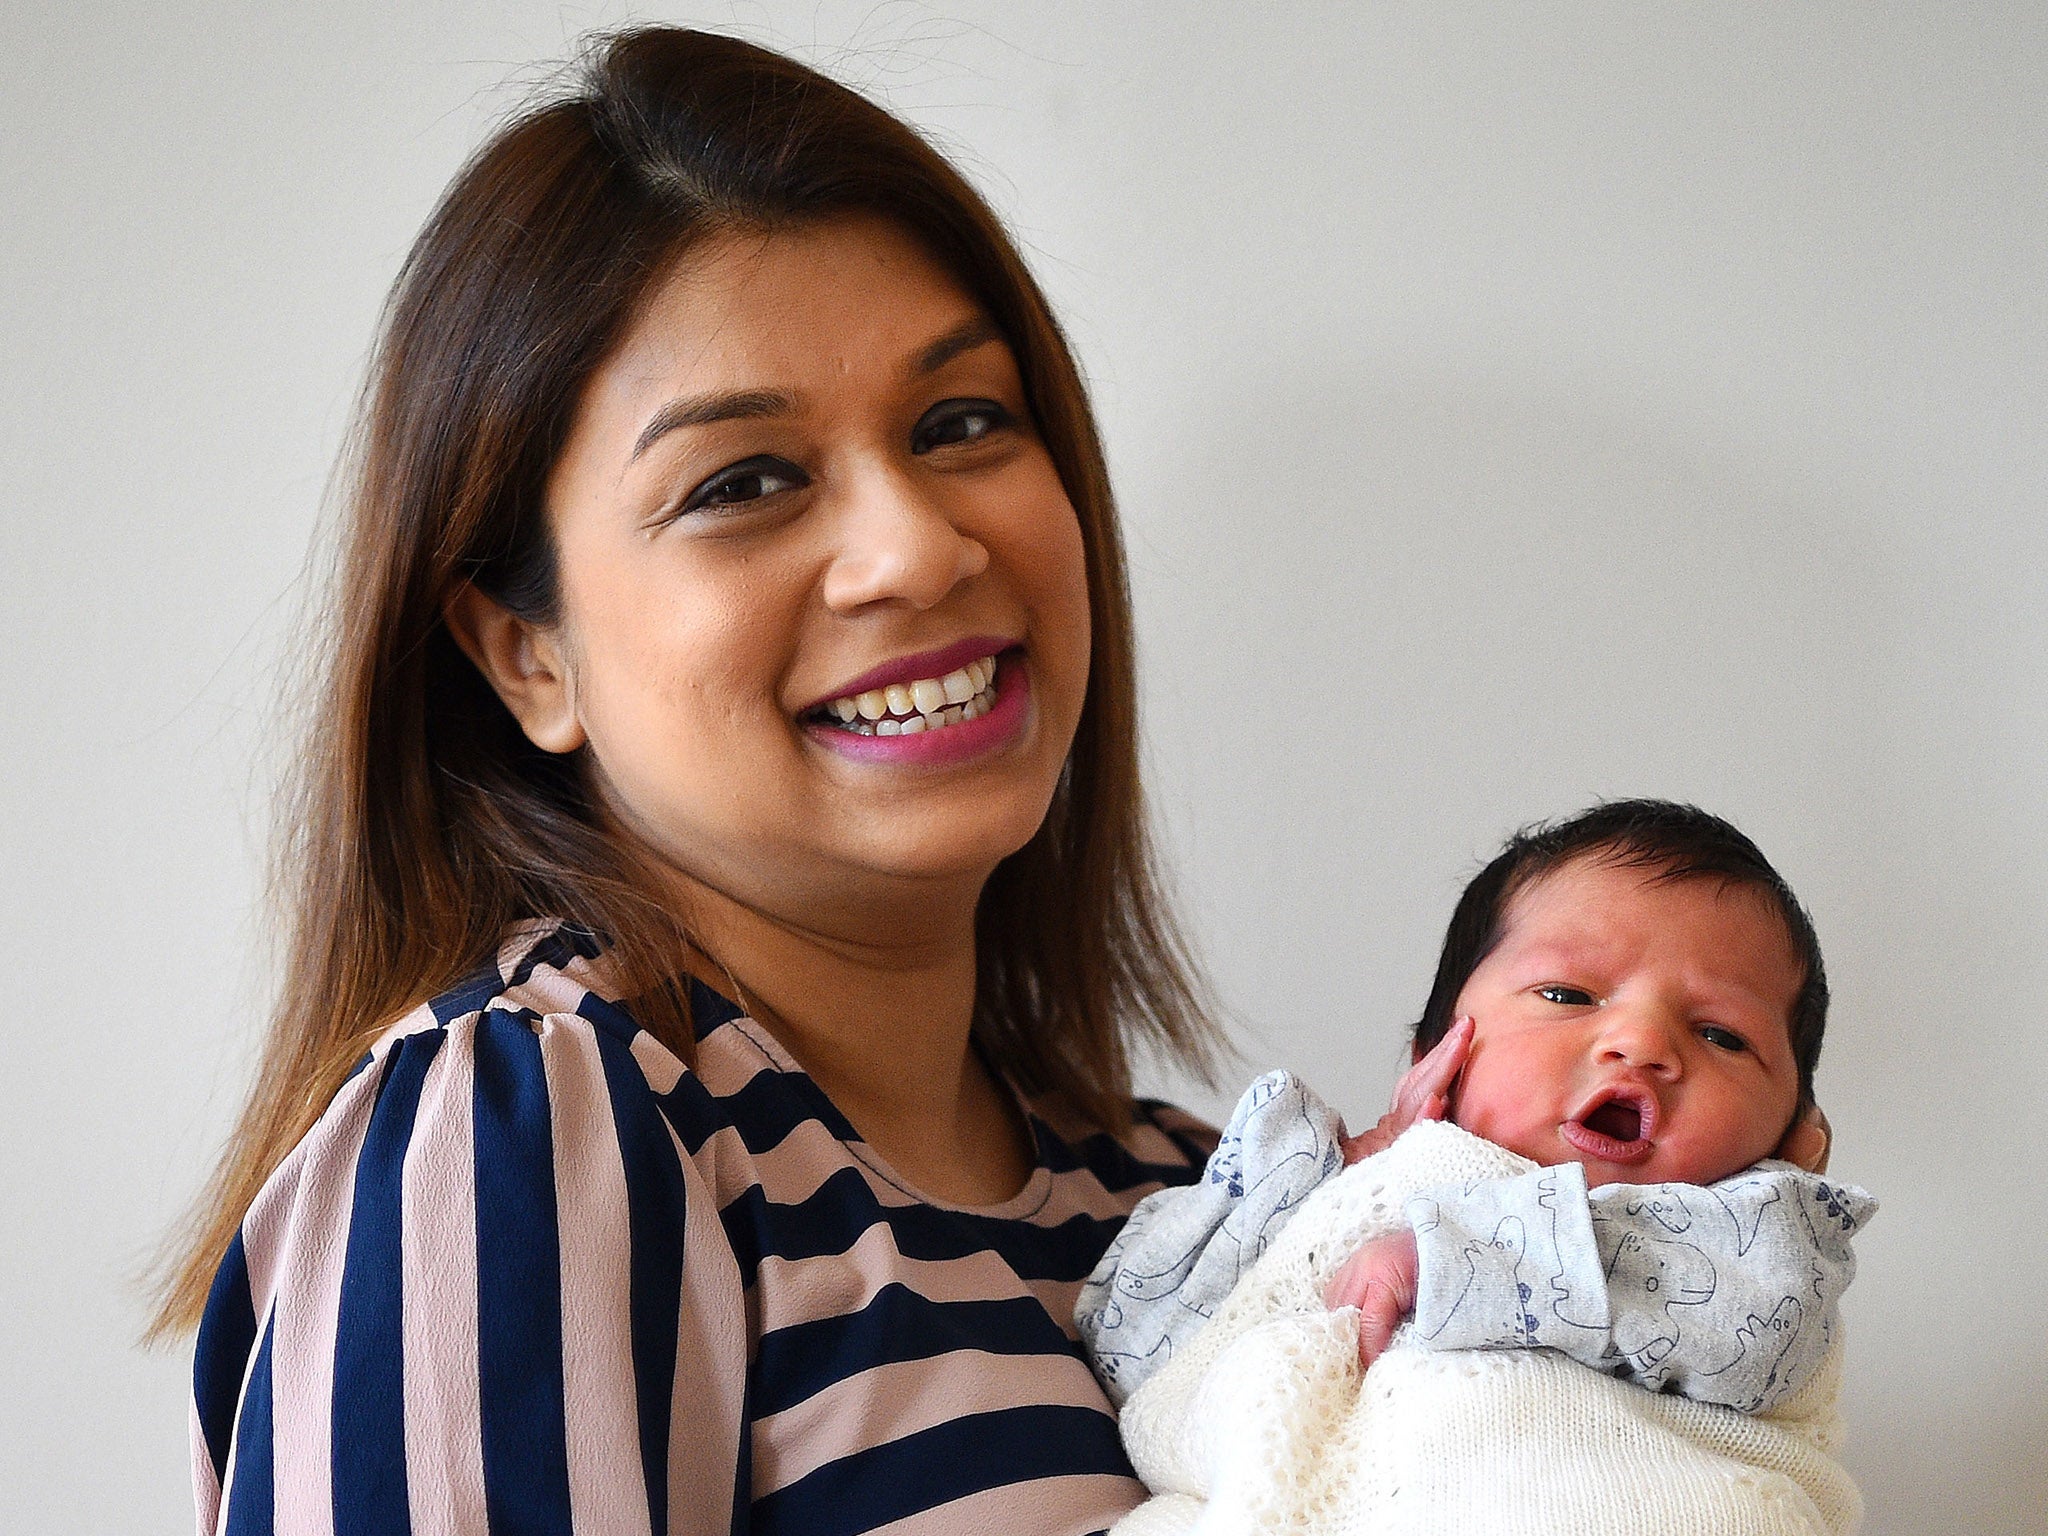 Labour’s Tulip Siddiq postponed the birth of her son by caesarean section in order to vote on the withdrawal agreement